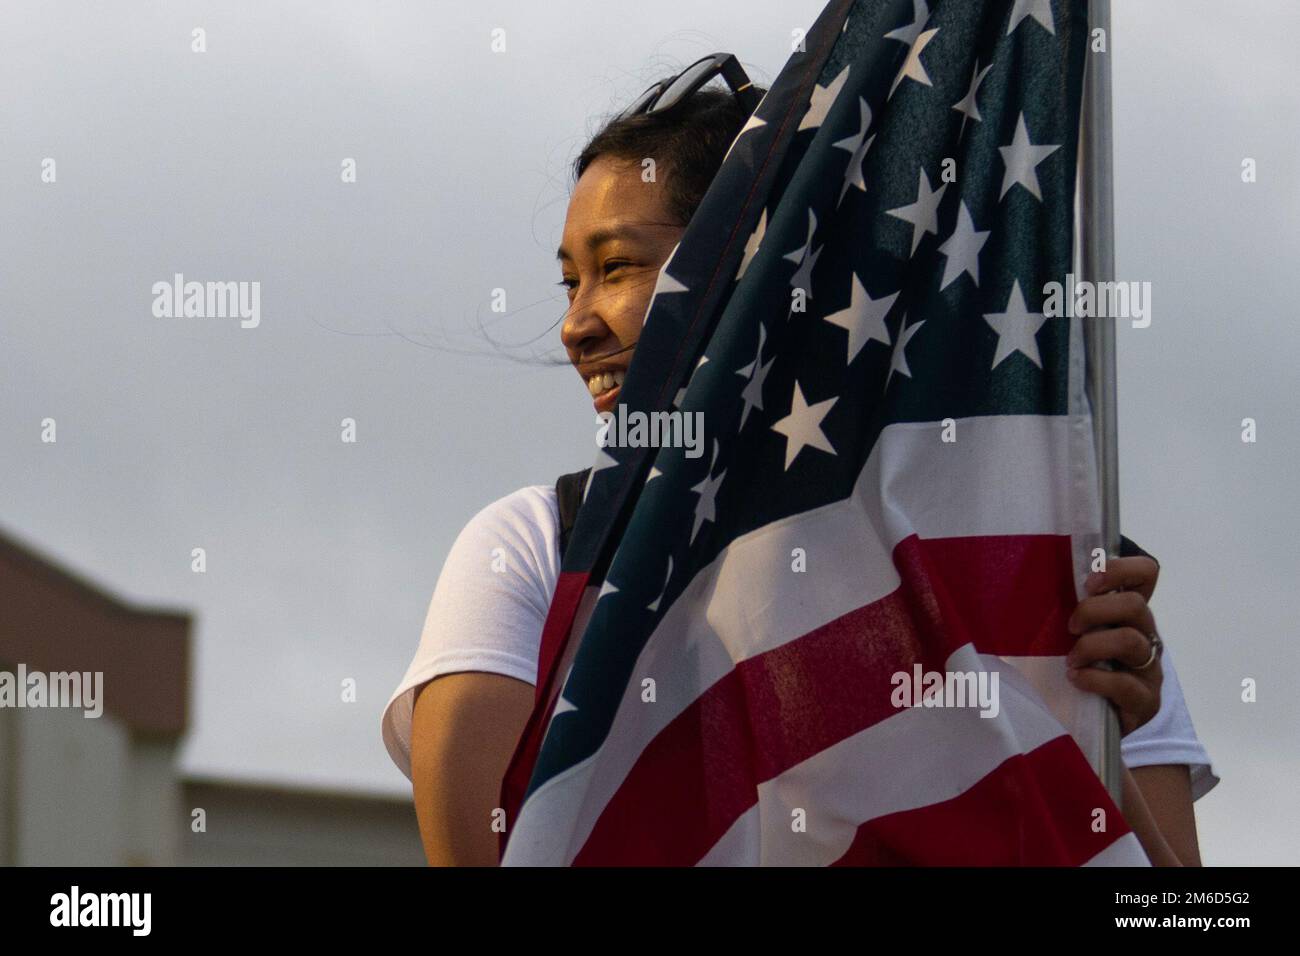 A U.S. Air Force service member holds an American flag at the 9th Annual Memorial for the Bataan Death March at Kadena Air Base, Japan, April 23, 2022. The event commemorated casualties and survivors from the 1942 Bataan Death March, during which approximately 76,000 Filipino and American service members endured a nearly 70-mile march during a prison transfer. Stock Photo